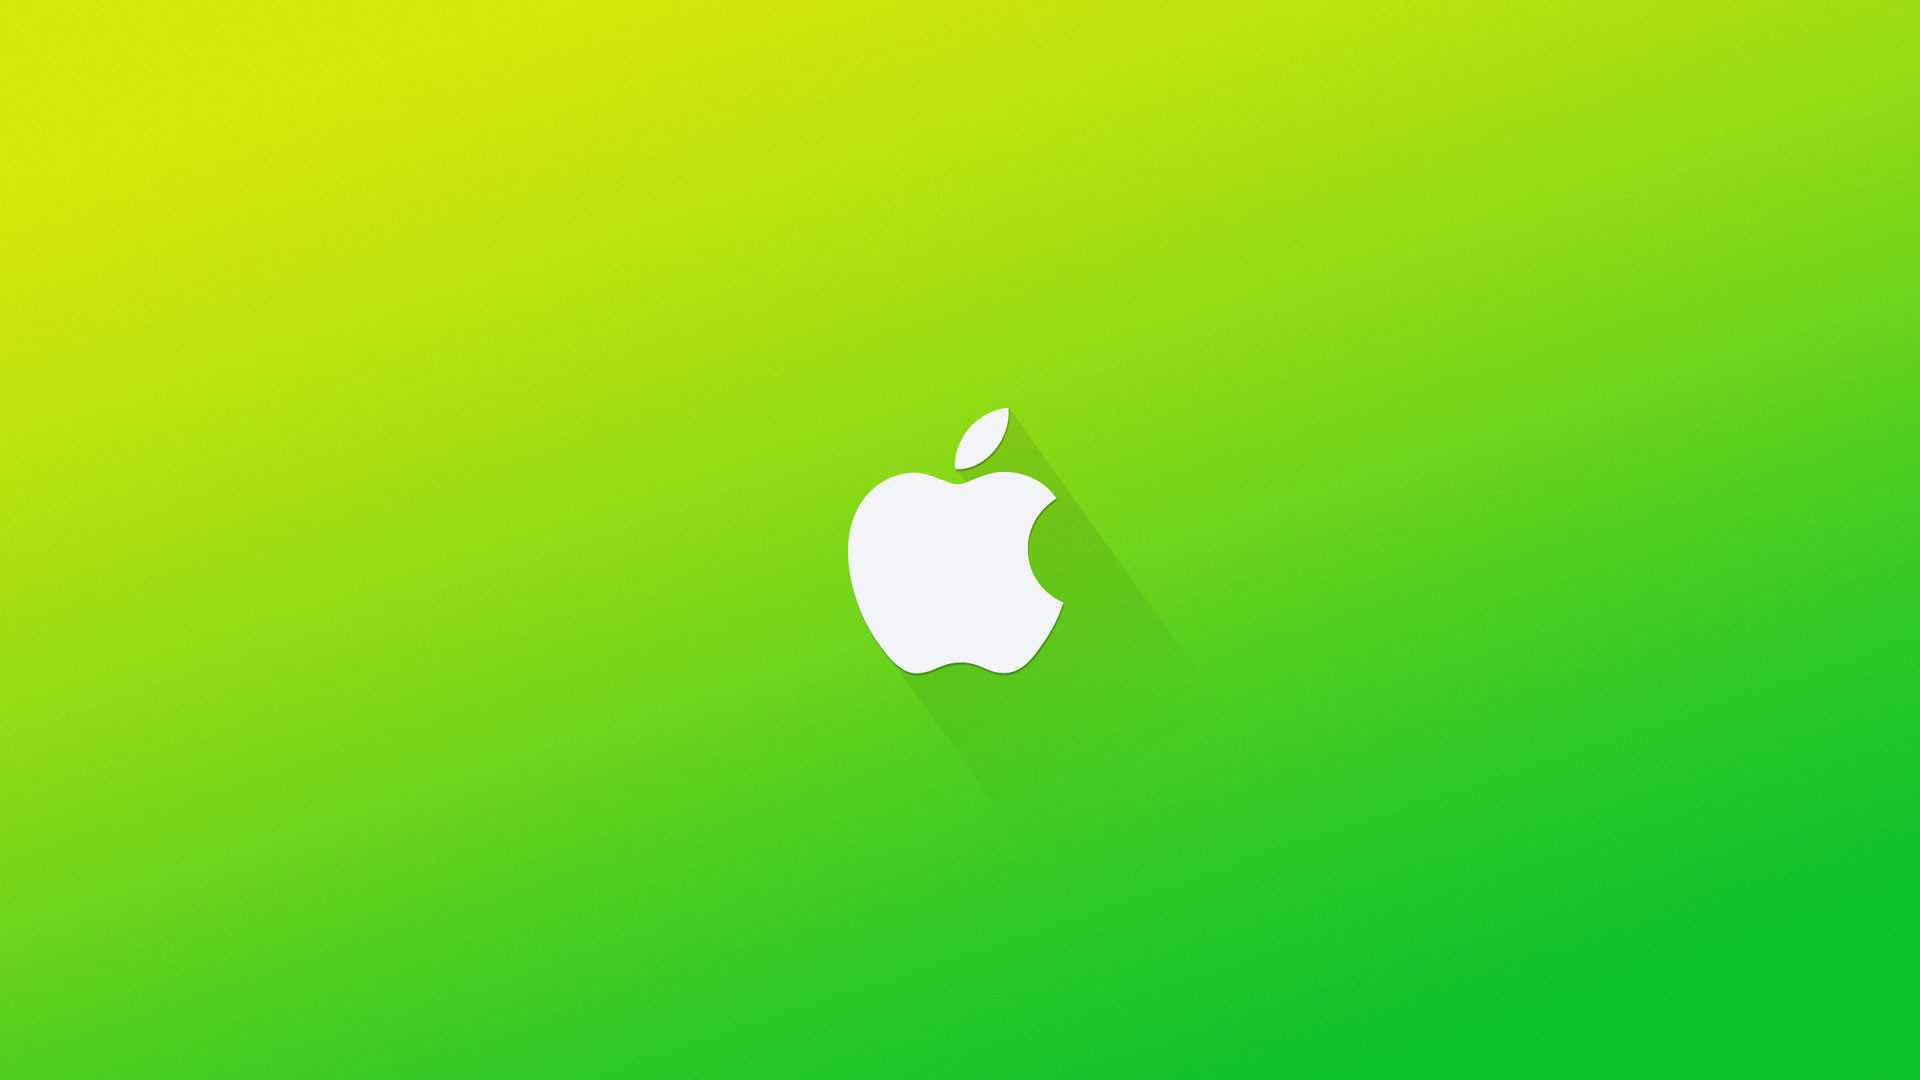 Hd pics photos attractive white apple logo in green background hd quality desktop background wallpaper